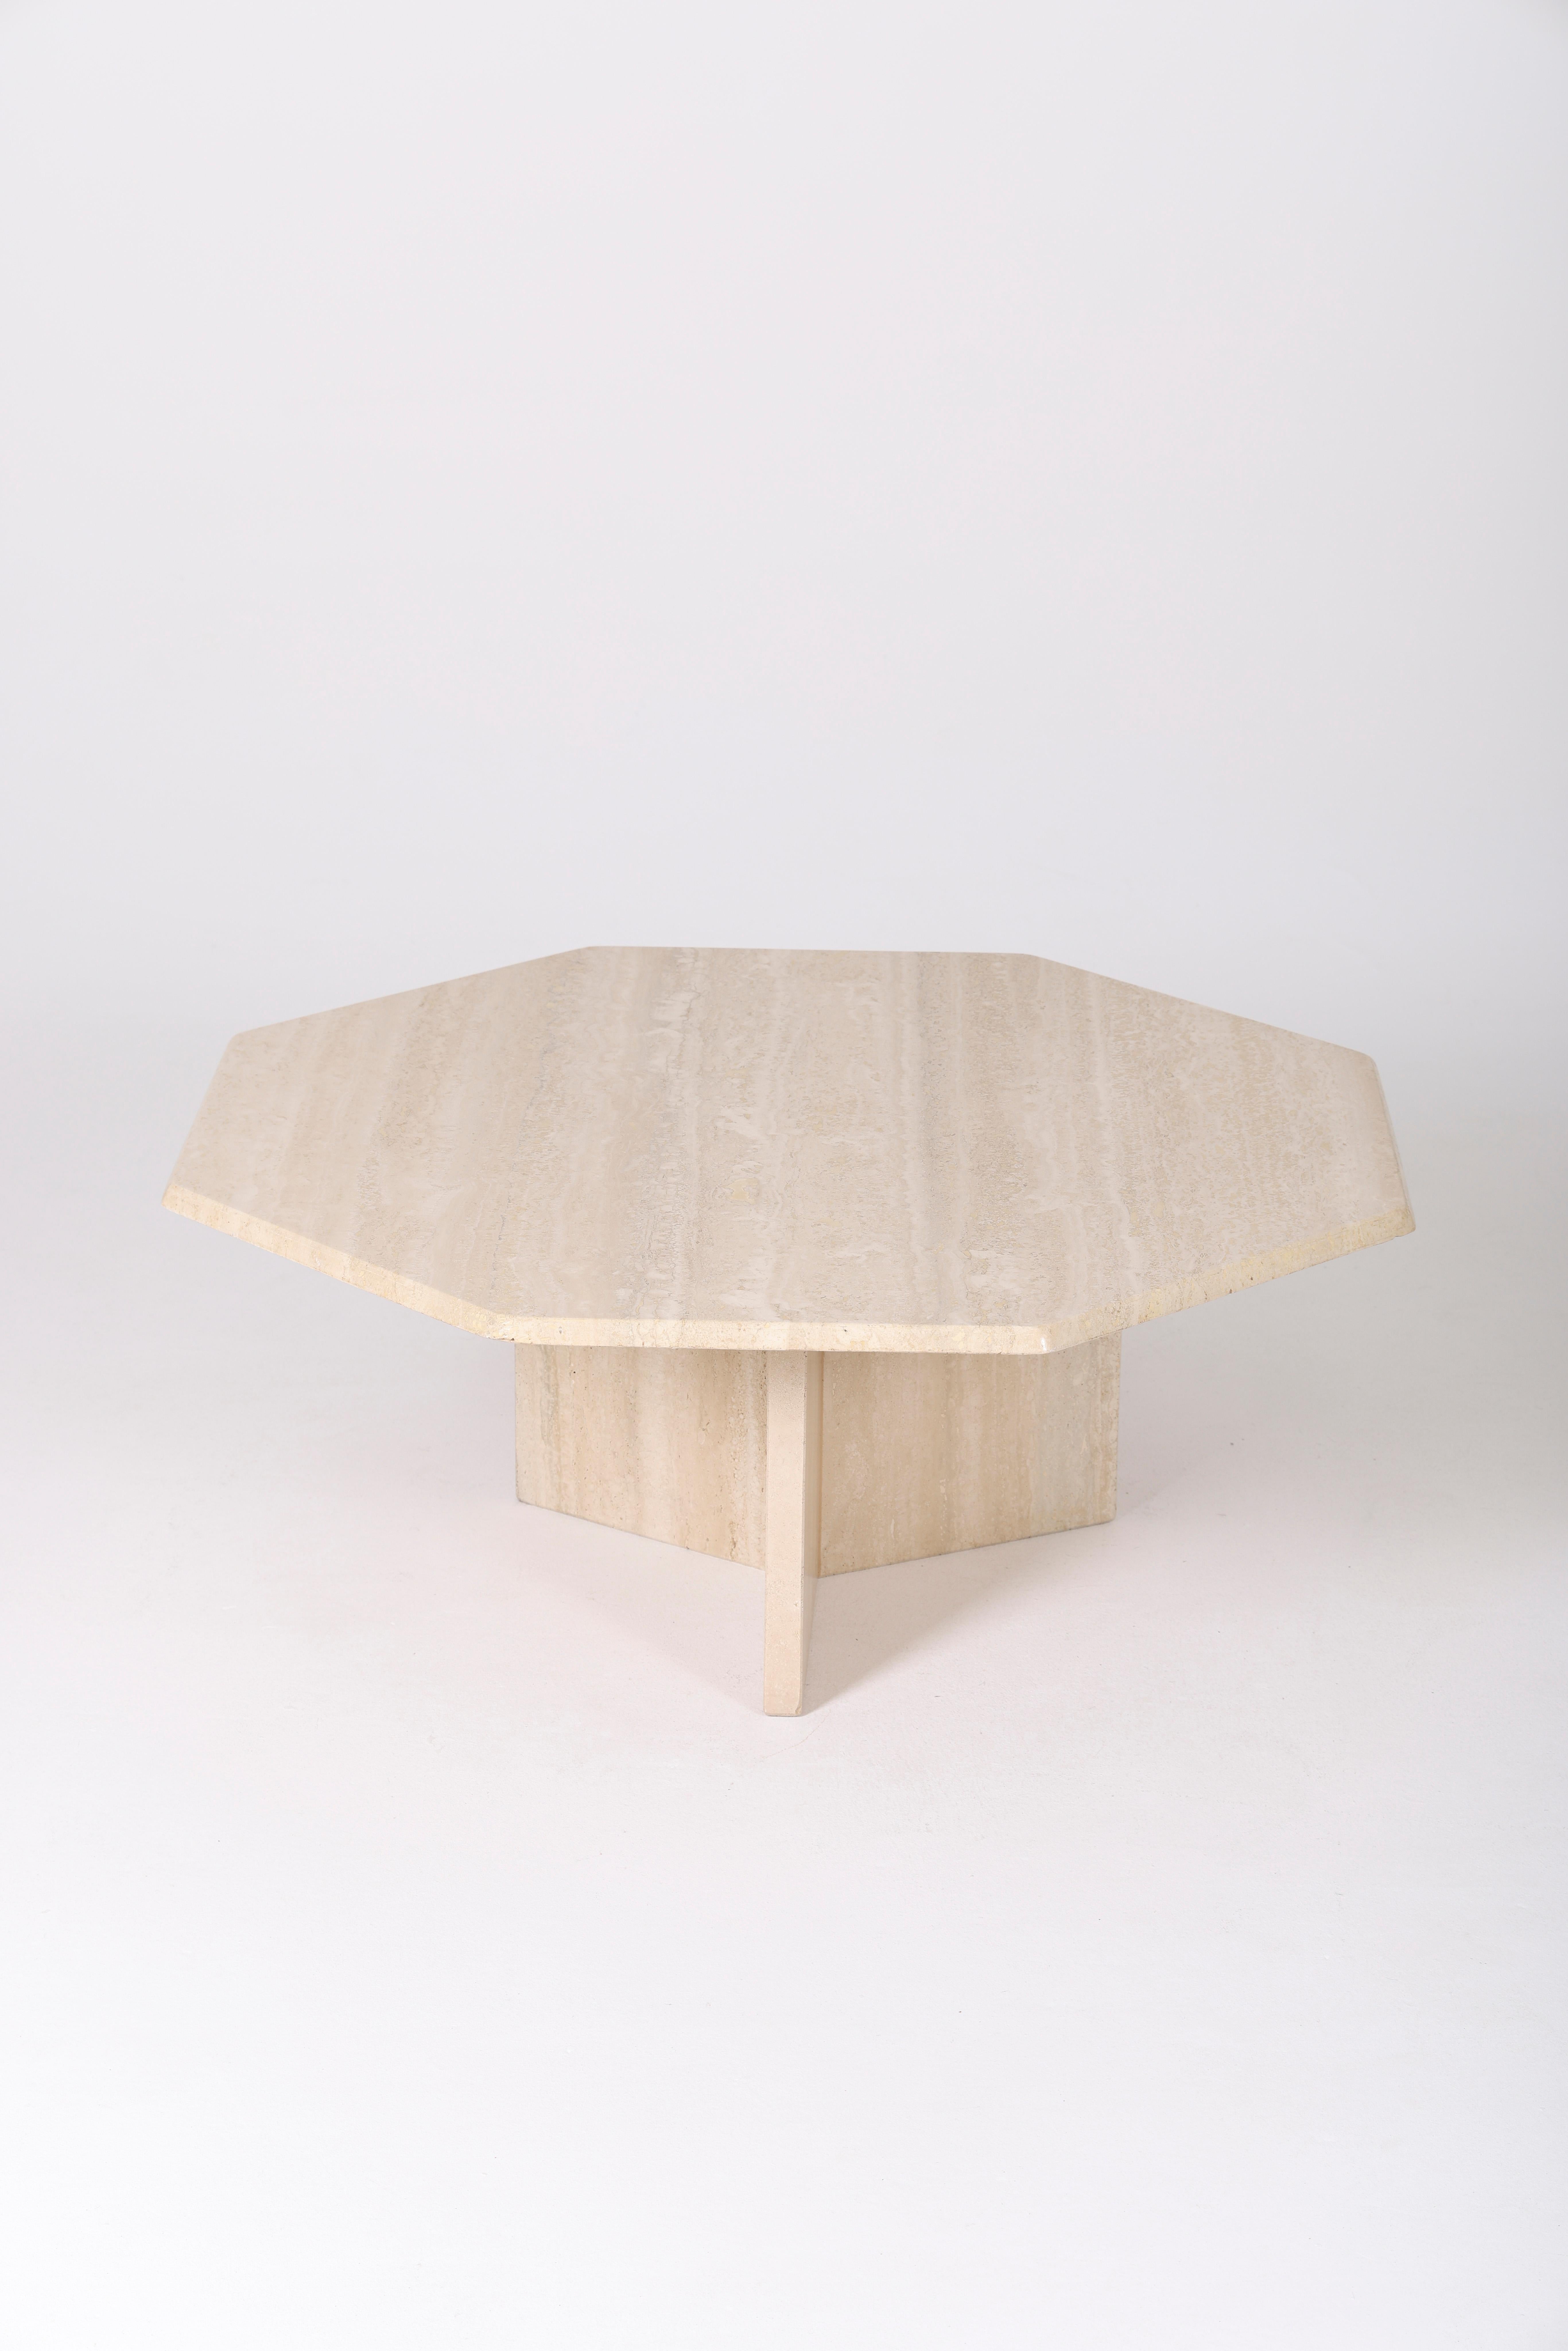 Octagonal coffee table in travertine. Italian design from the 80s. Octagonal top with rounded corners, placed on a 3-legged base. Very good condition.
LP984.